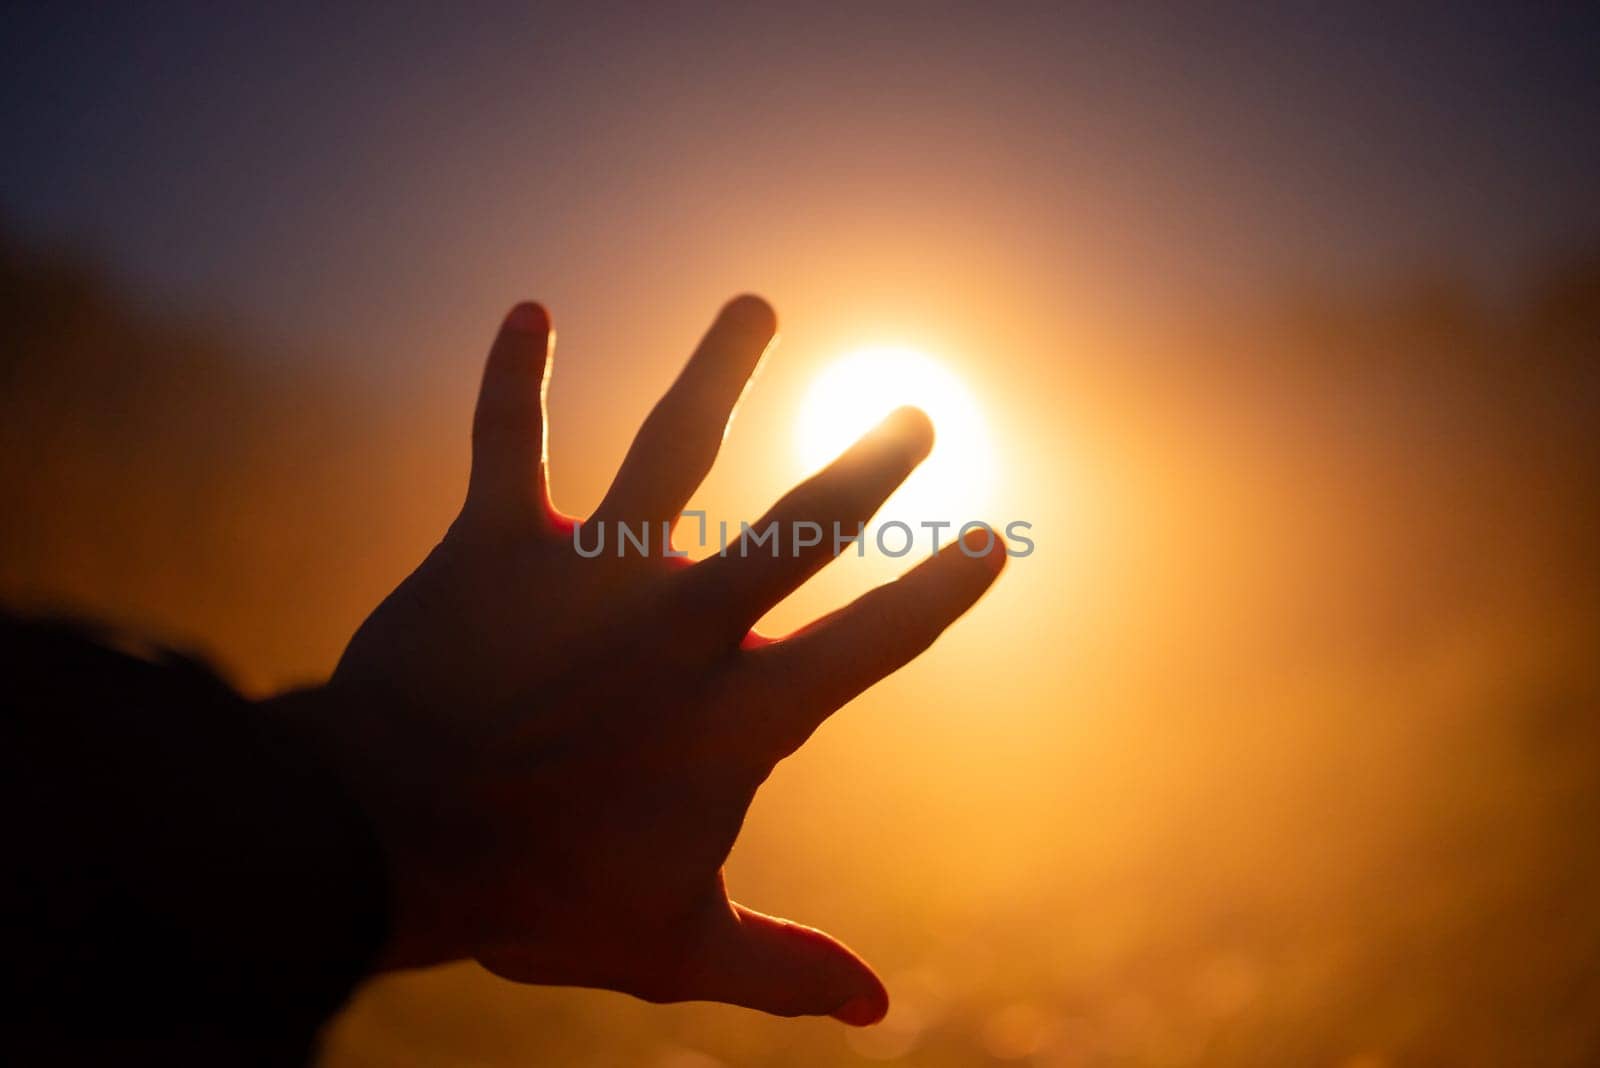 Hand of a person on the background of bright orange vehicle headlight by VitaliiPetrushenko